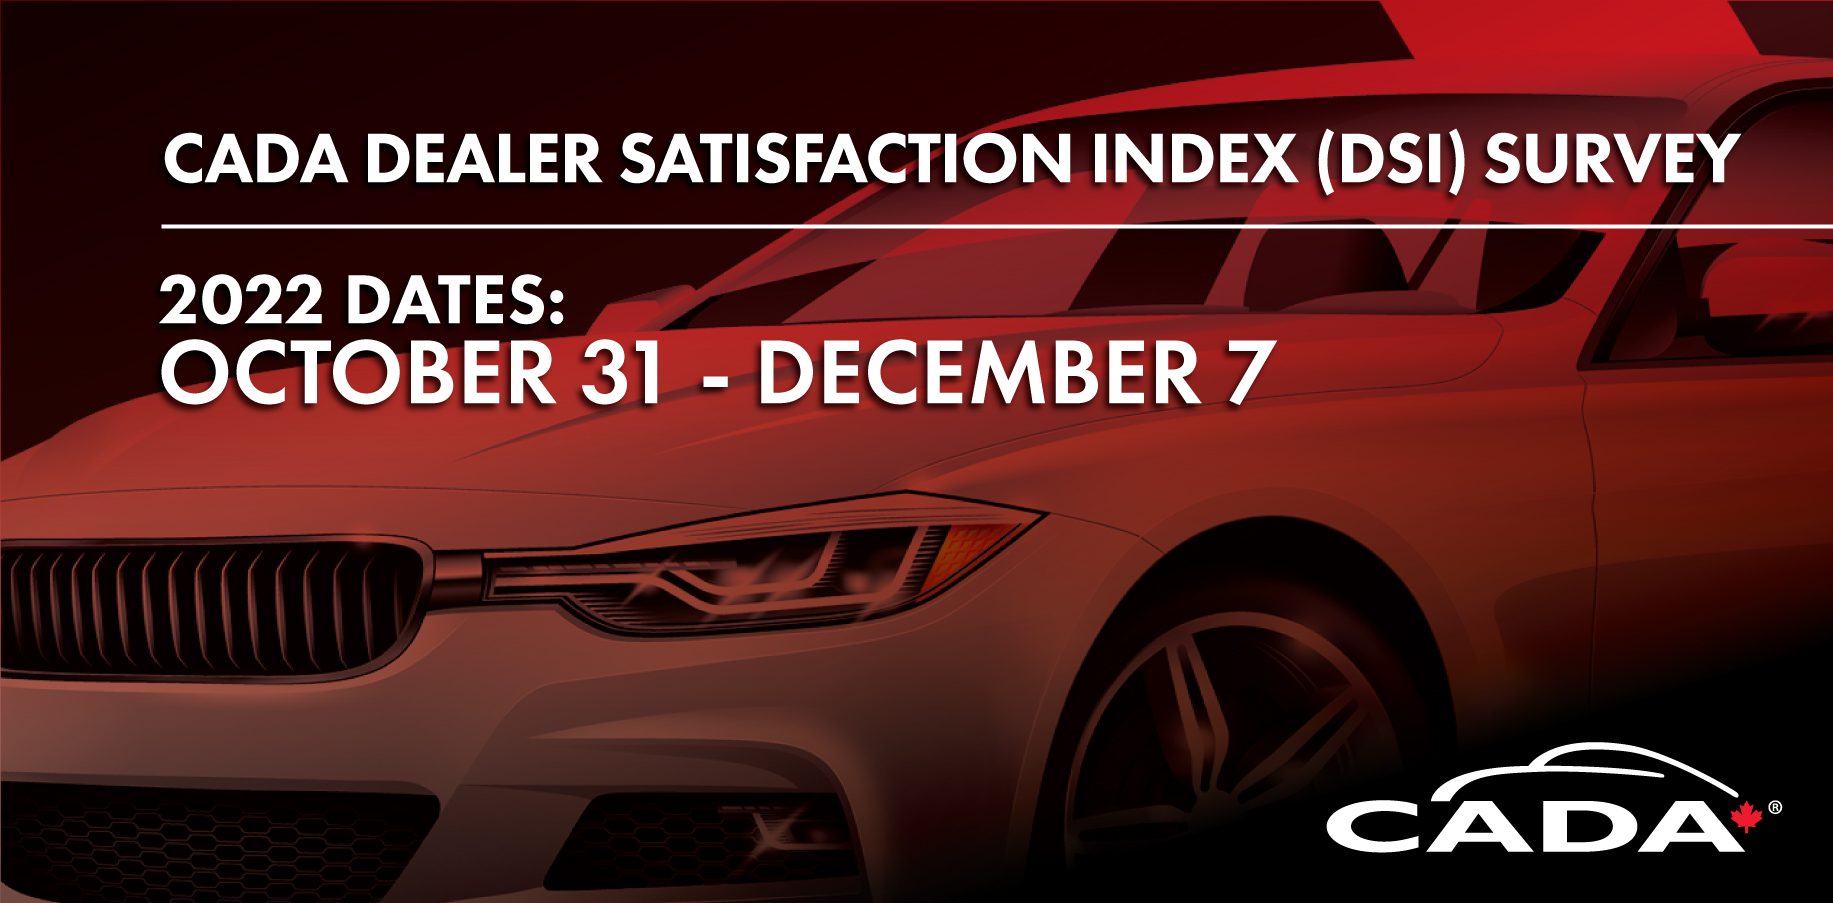 Don’t forget to fill out the 2022 CADA Dealer Satisfaction Index Survey by this Wednesday, December 7